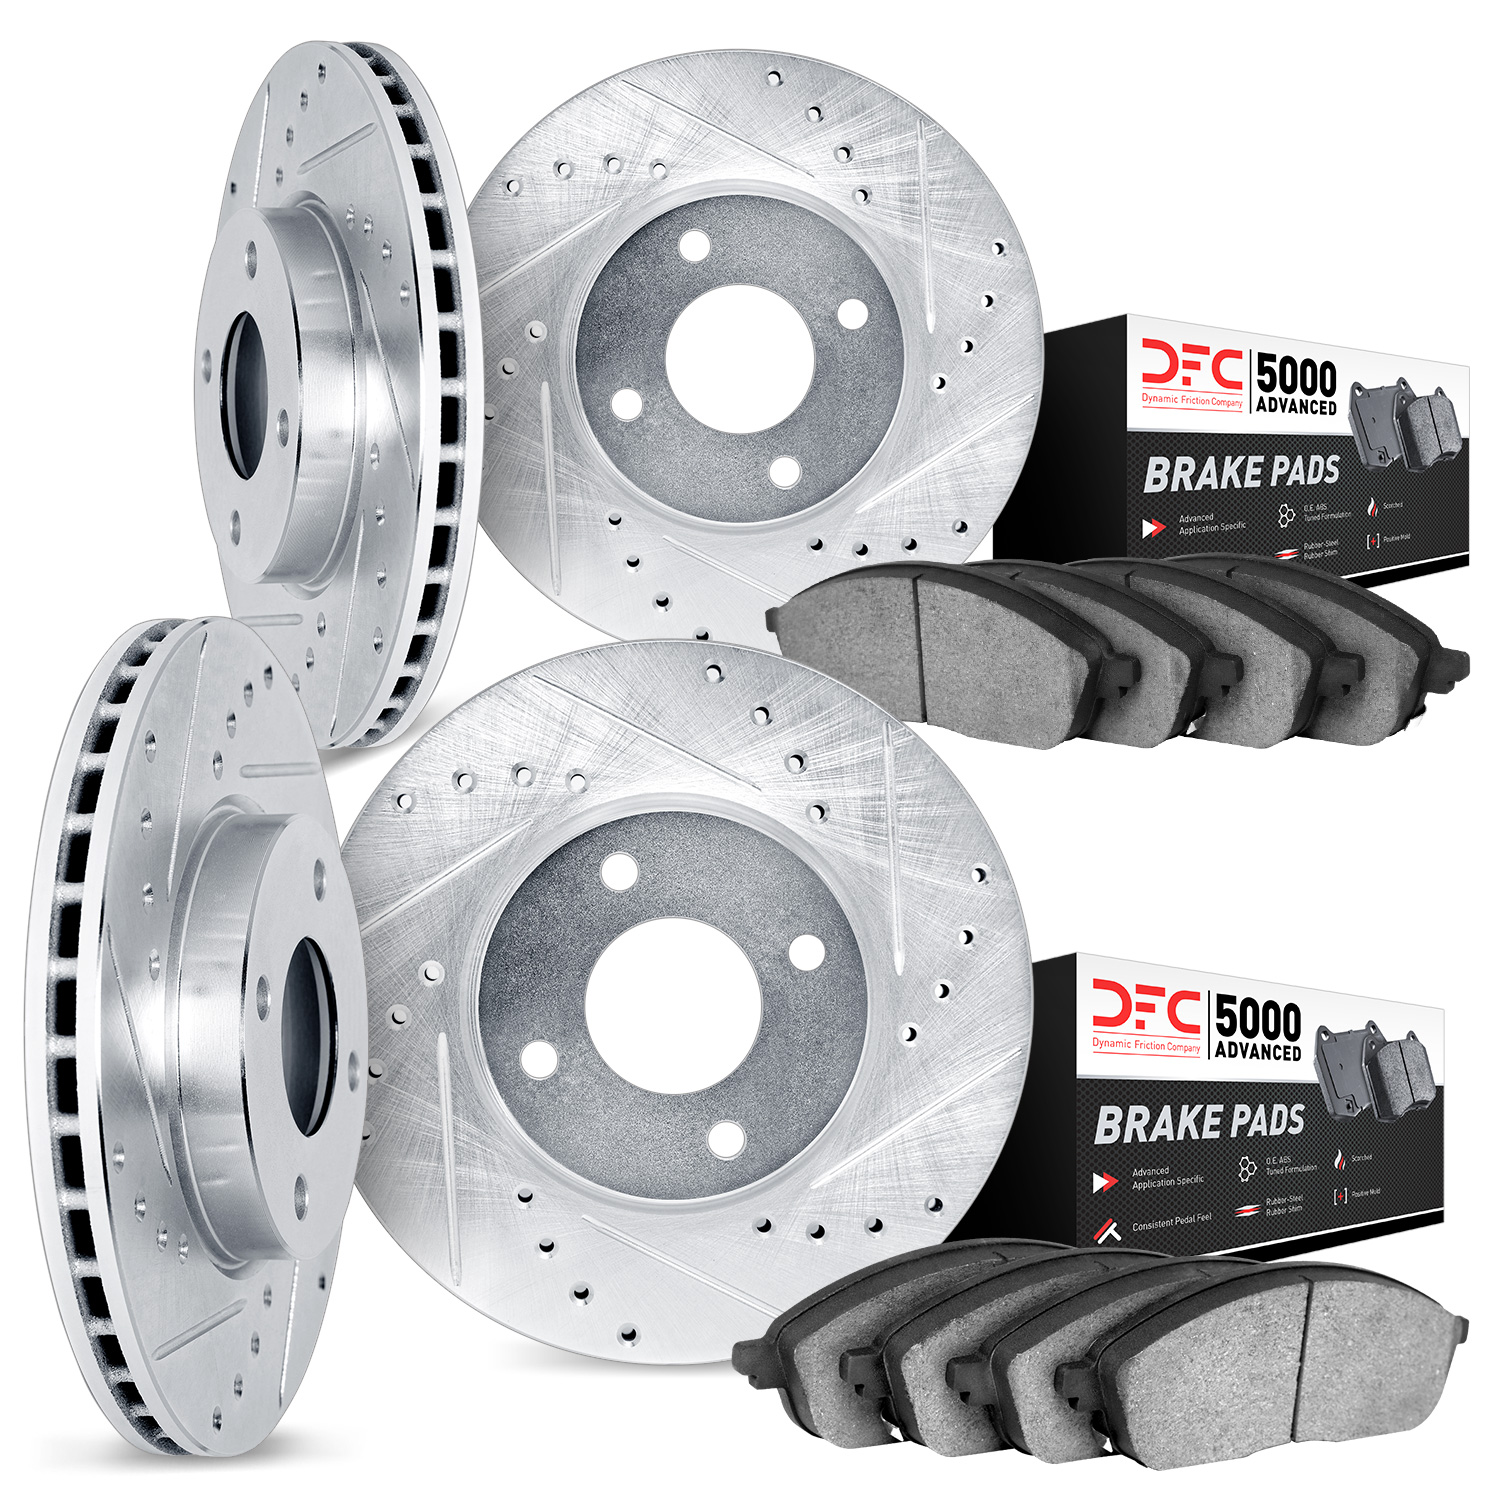 7504-56027 Drilled/Slotted Brake Rotors w/5000 Advanced Brake Pads Kit [Silver], 1998-2000 Ford/Lincoln/Mercury/Mazda, Position: